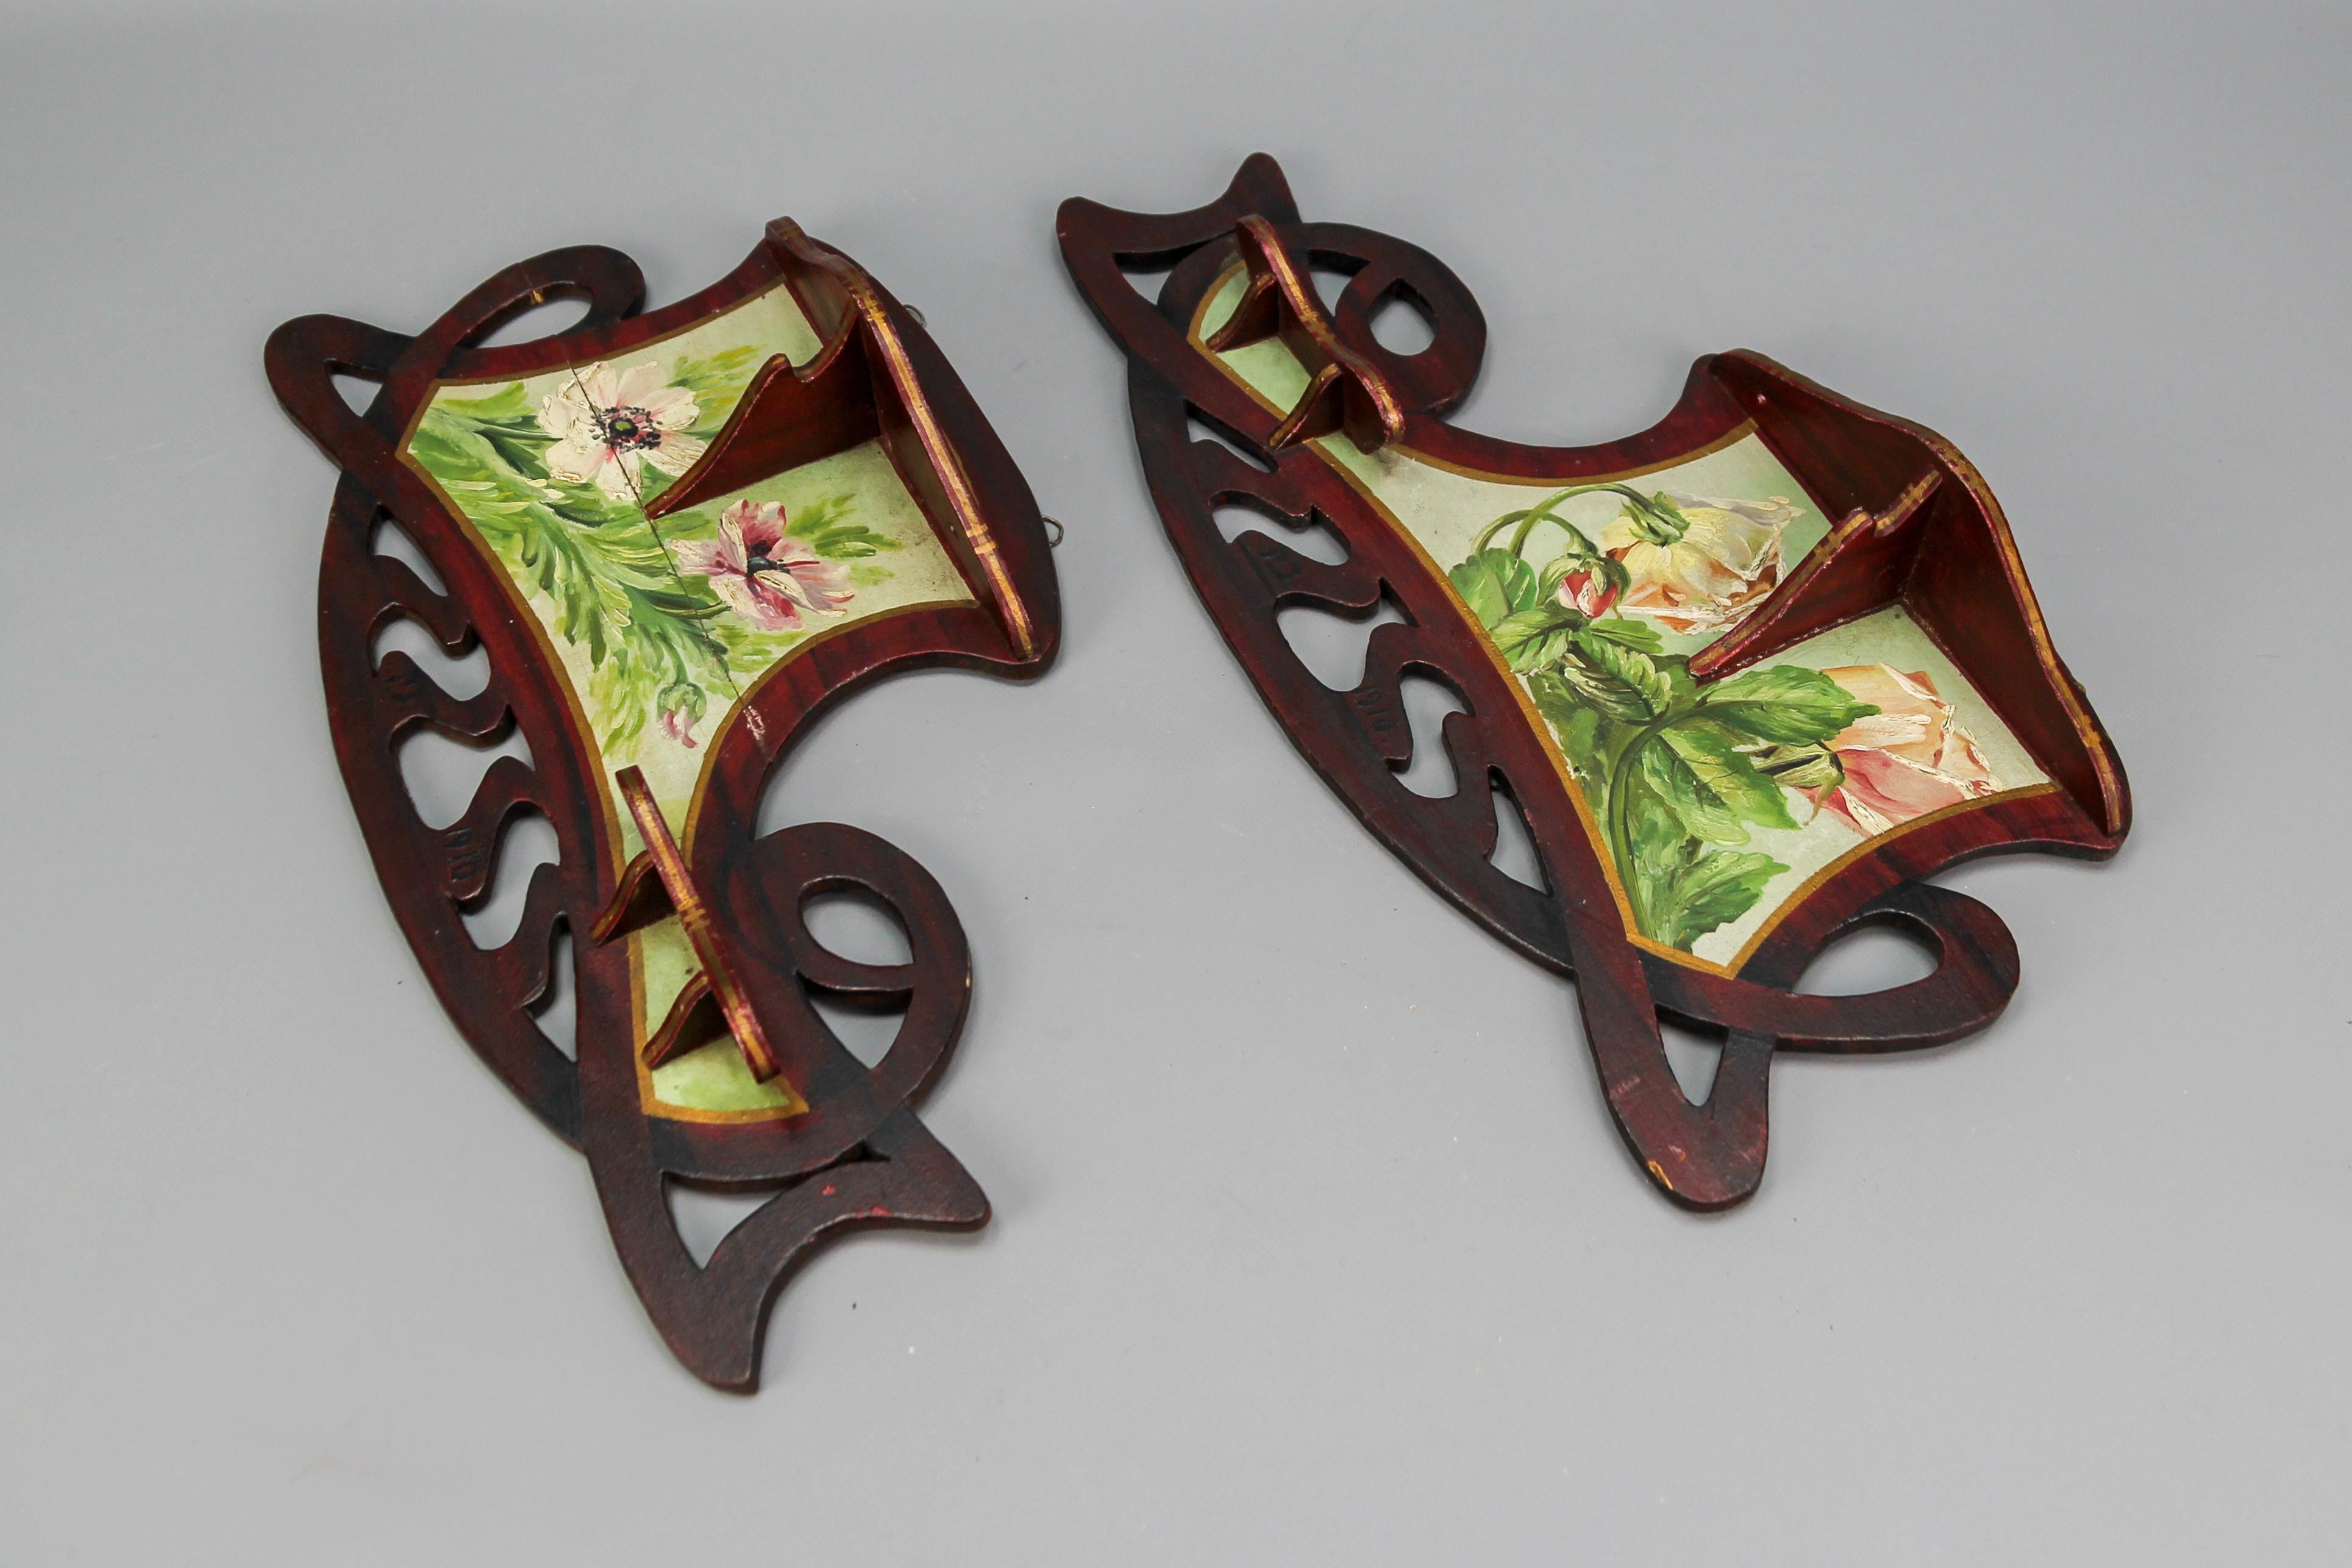 Pair of Art Nouveau Wooden Hand-Painted Floral Shelves, Germany, 1910 For Sale 4